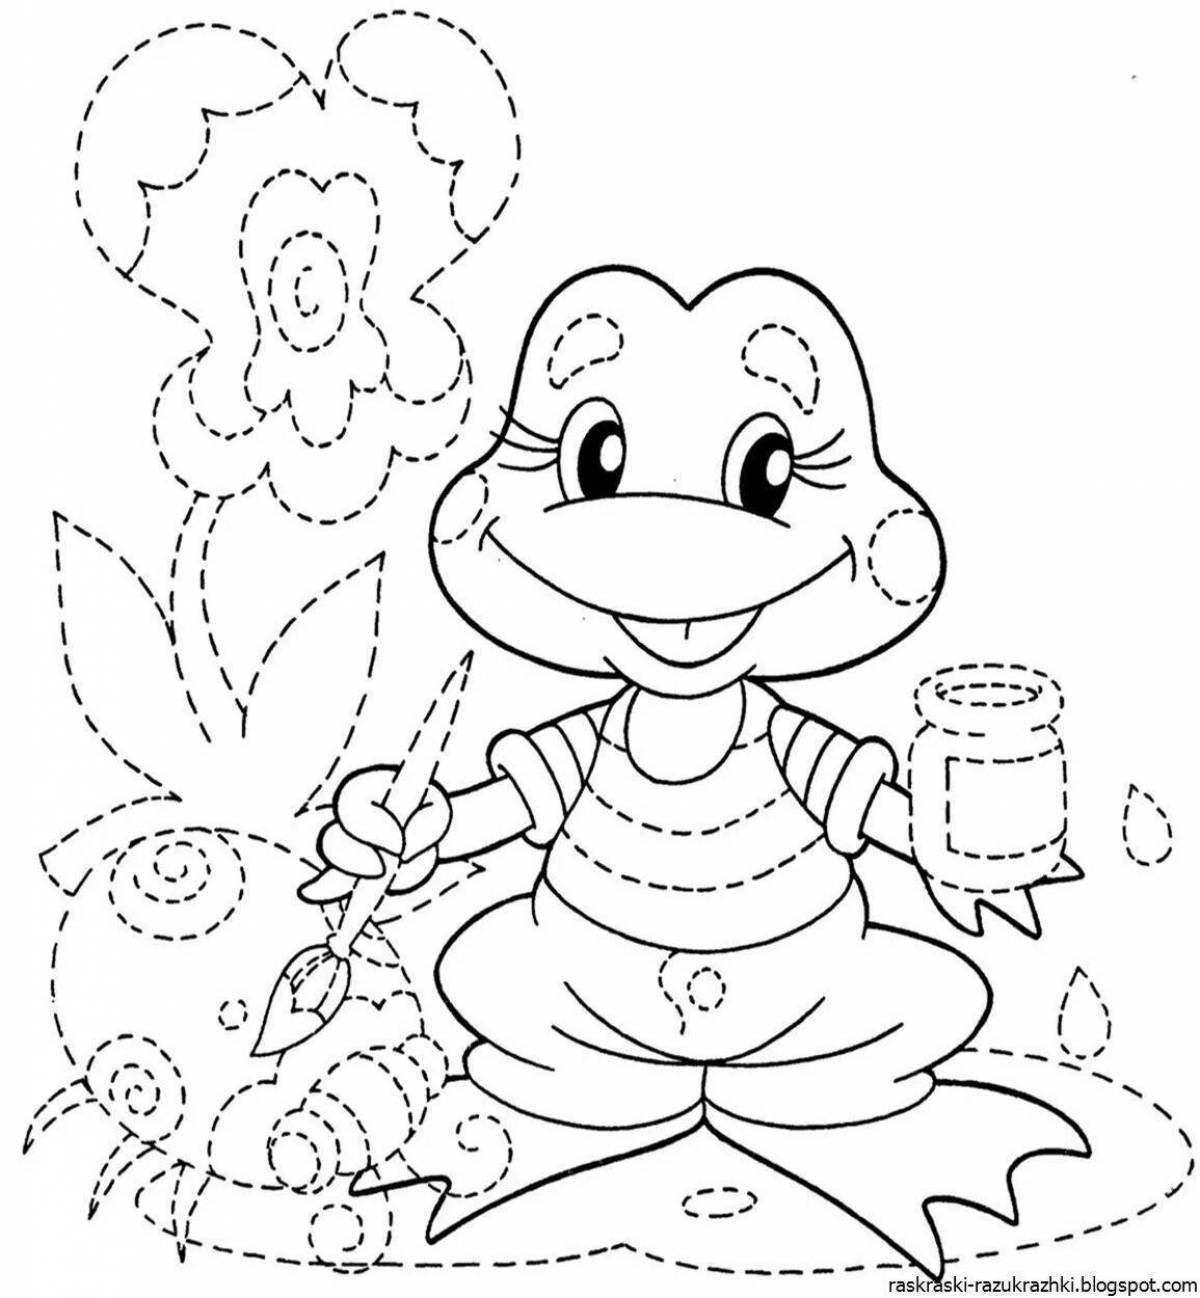 Coloring book for children 5 6 years old #14